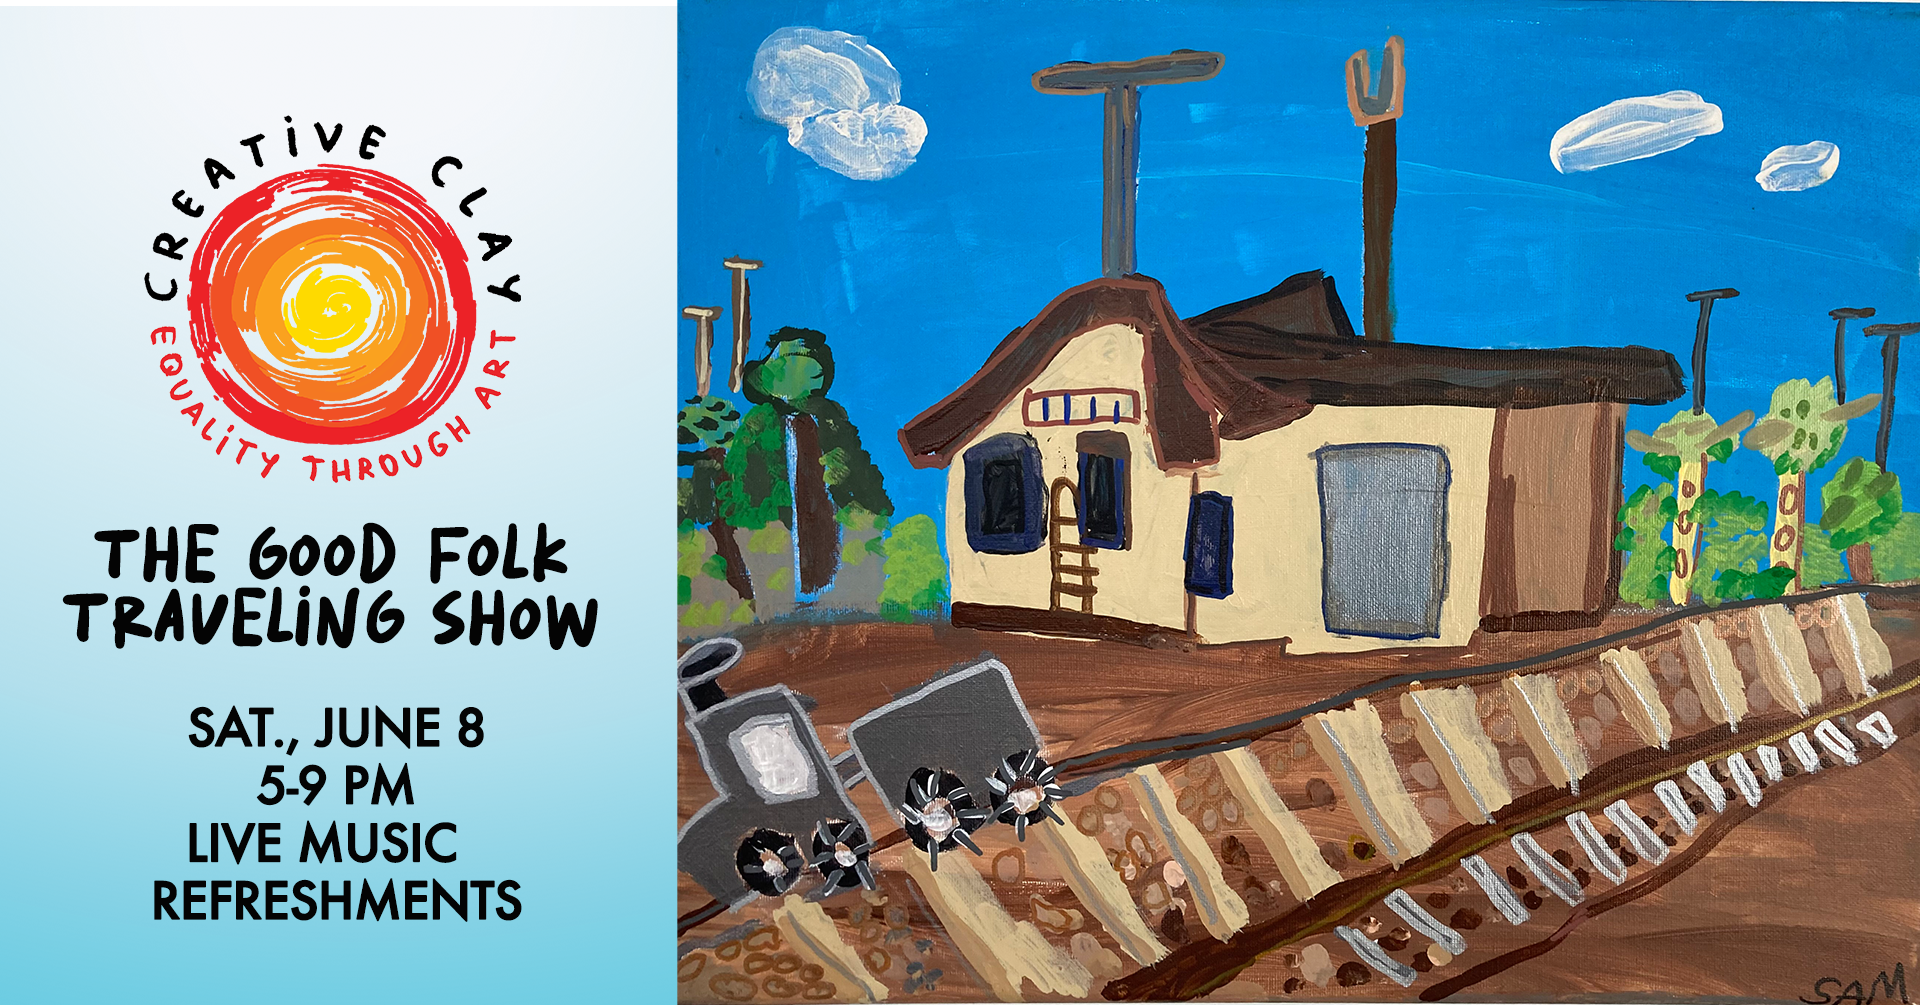 The graphic is for the June ArtWalk - The Good Folk Traveling Show.